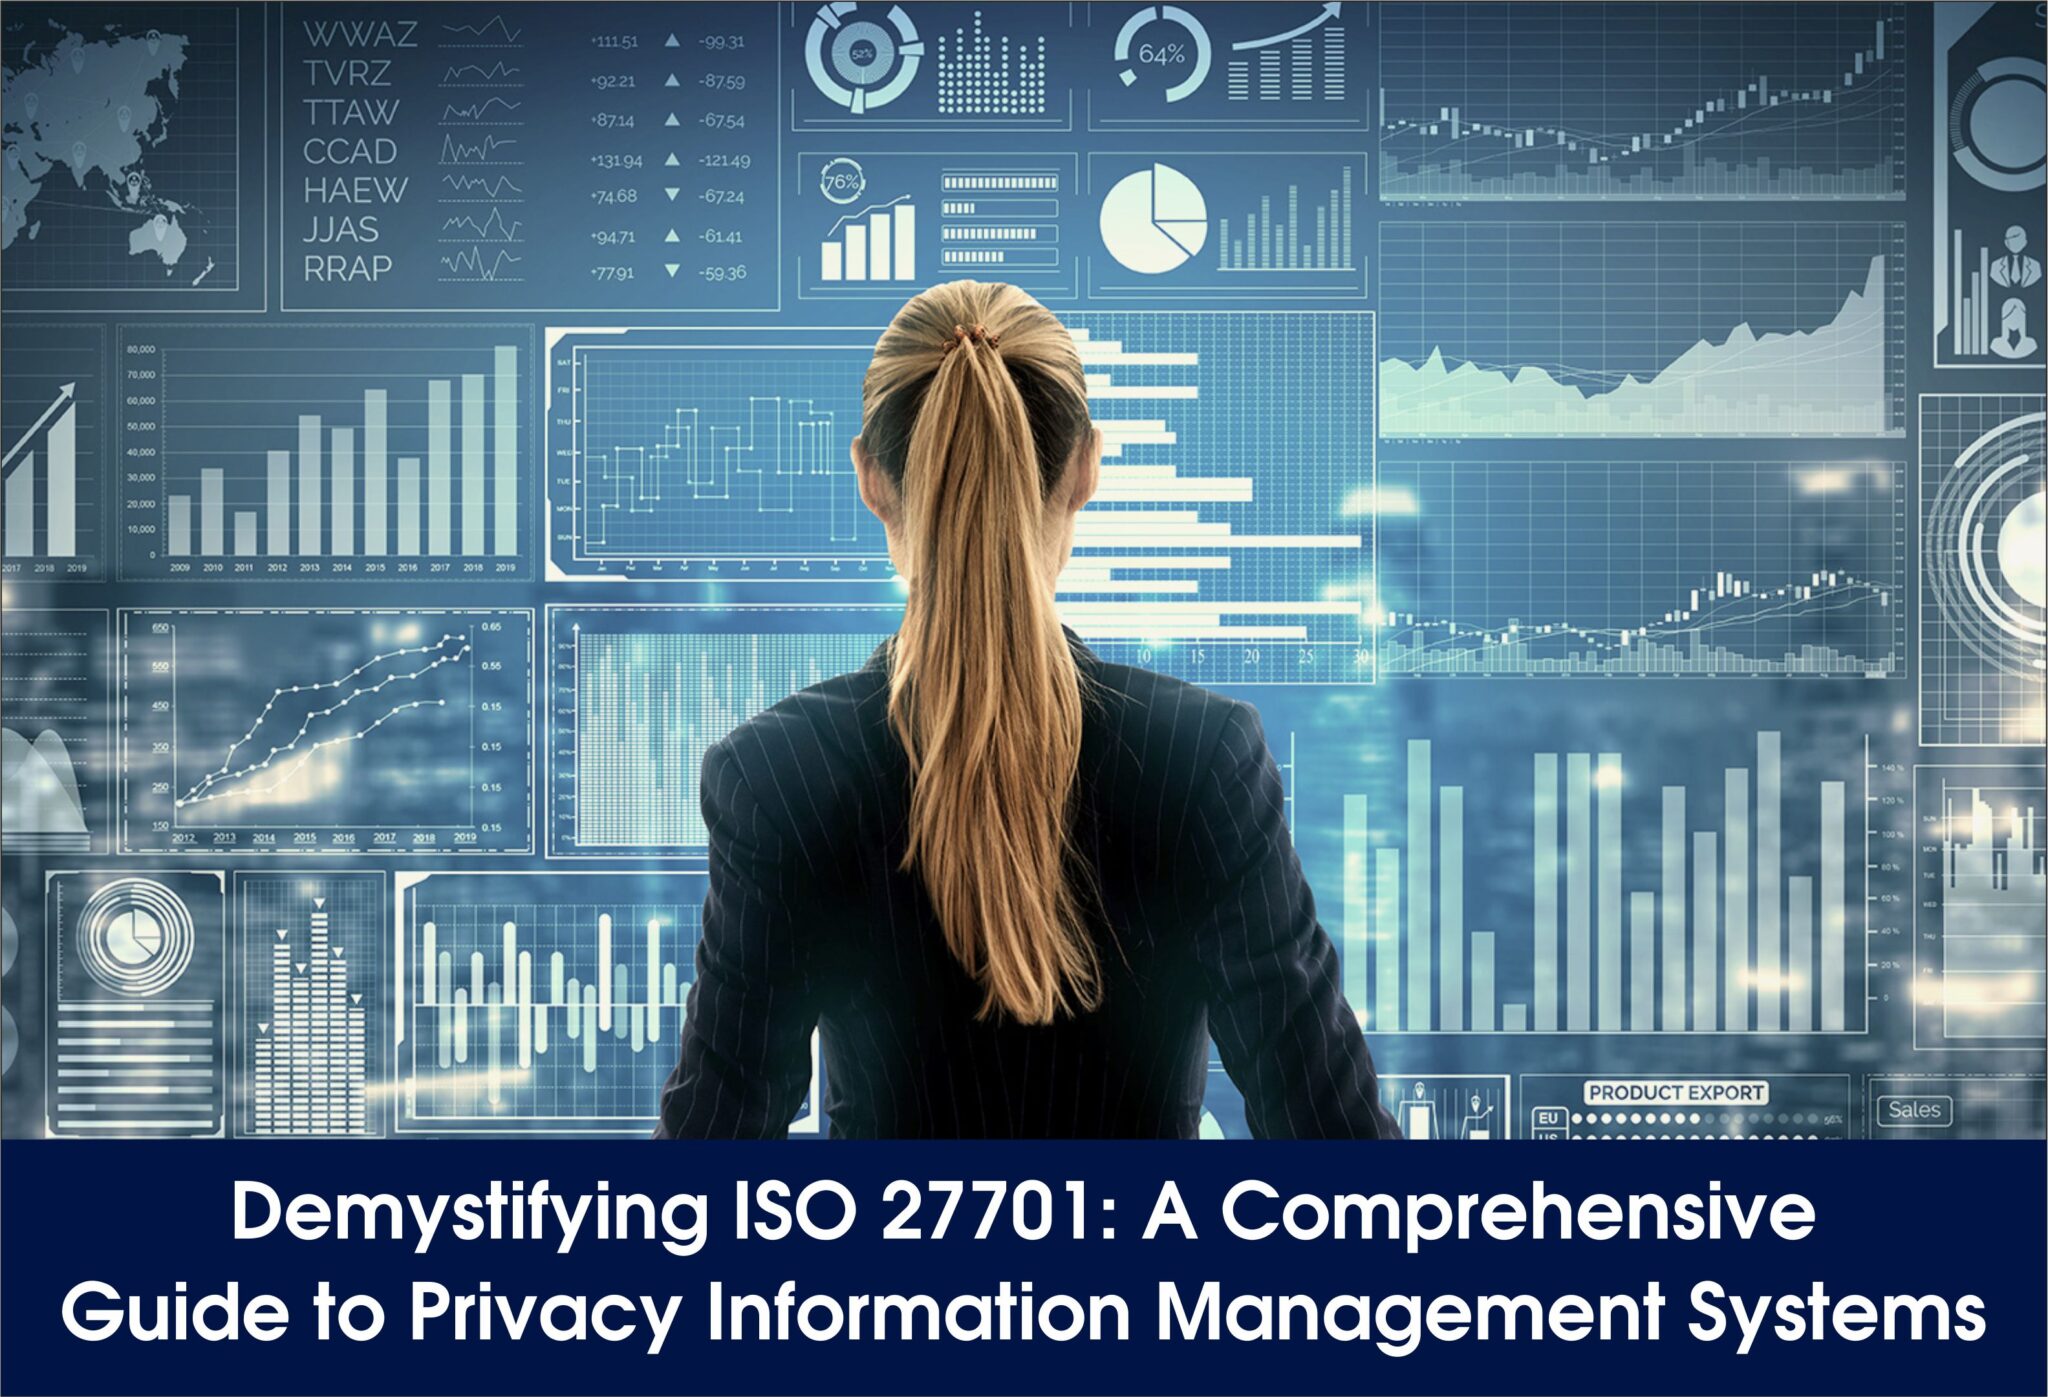 Demystifying ISO 27701: A Comprehensive Guide to Privacy Information Management Systems